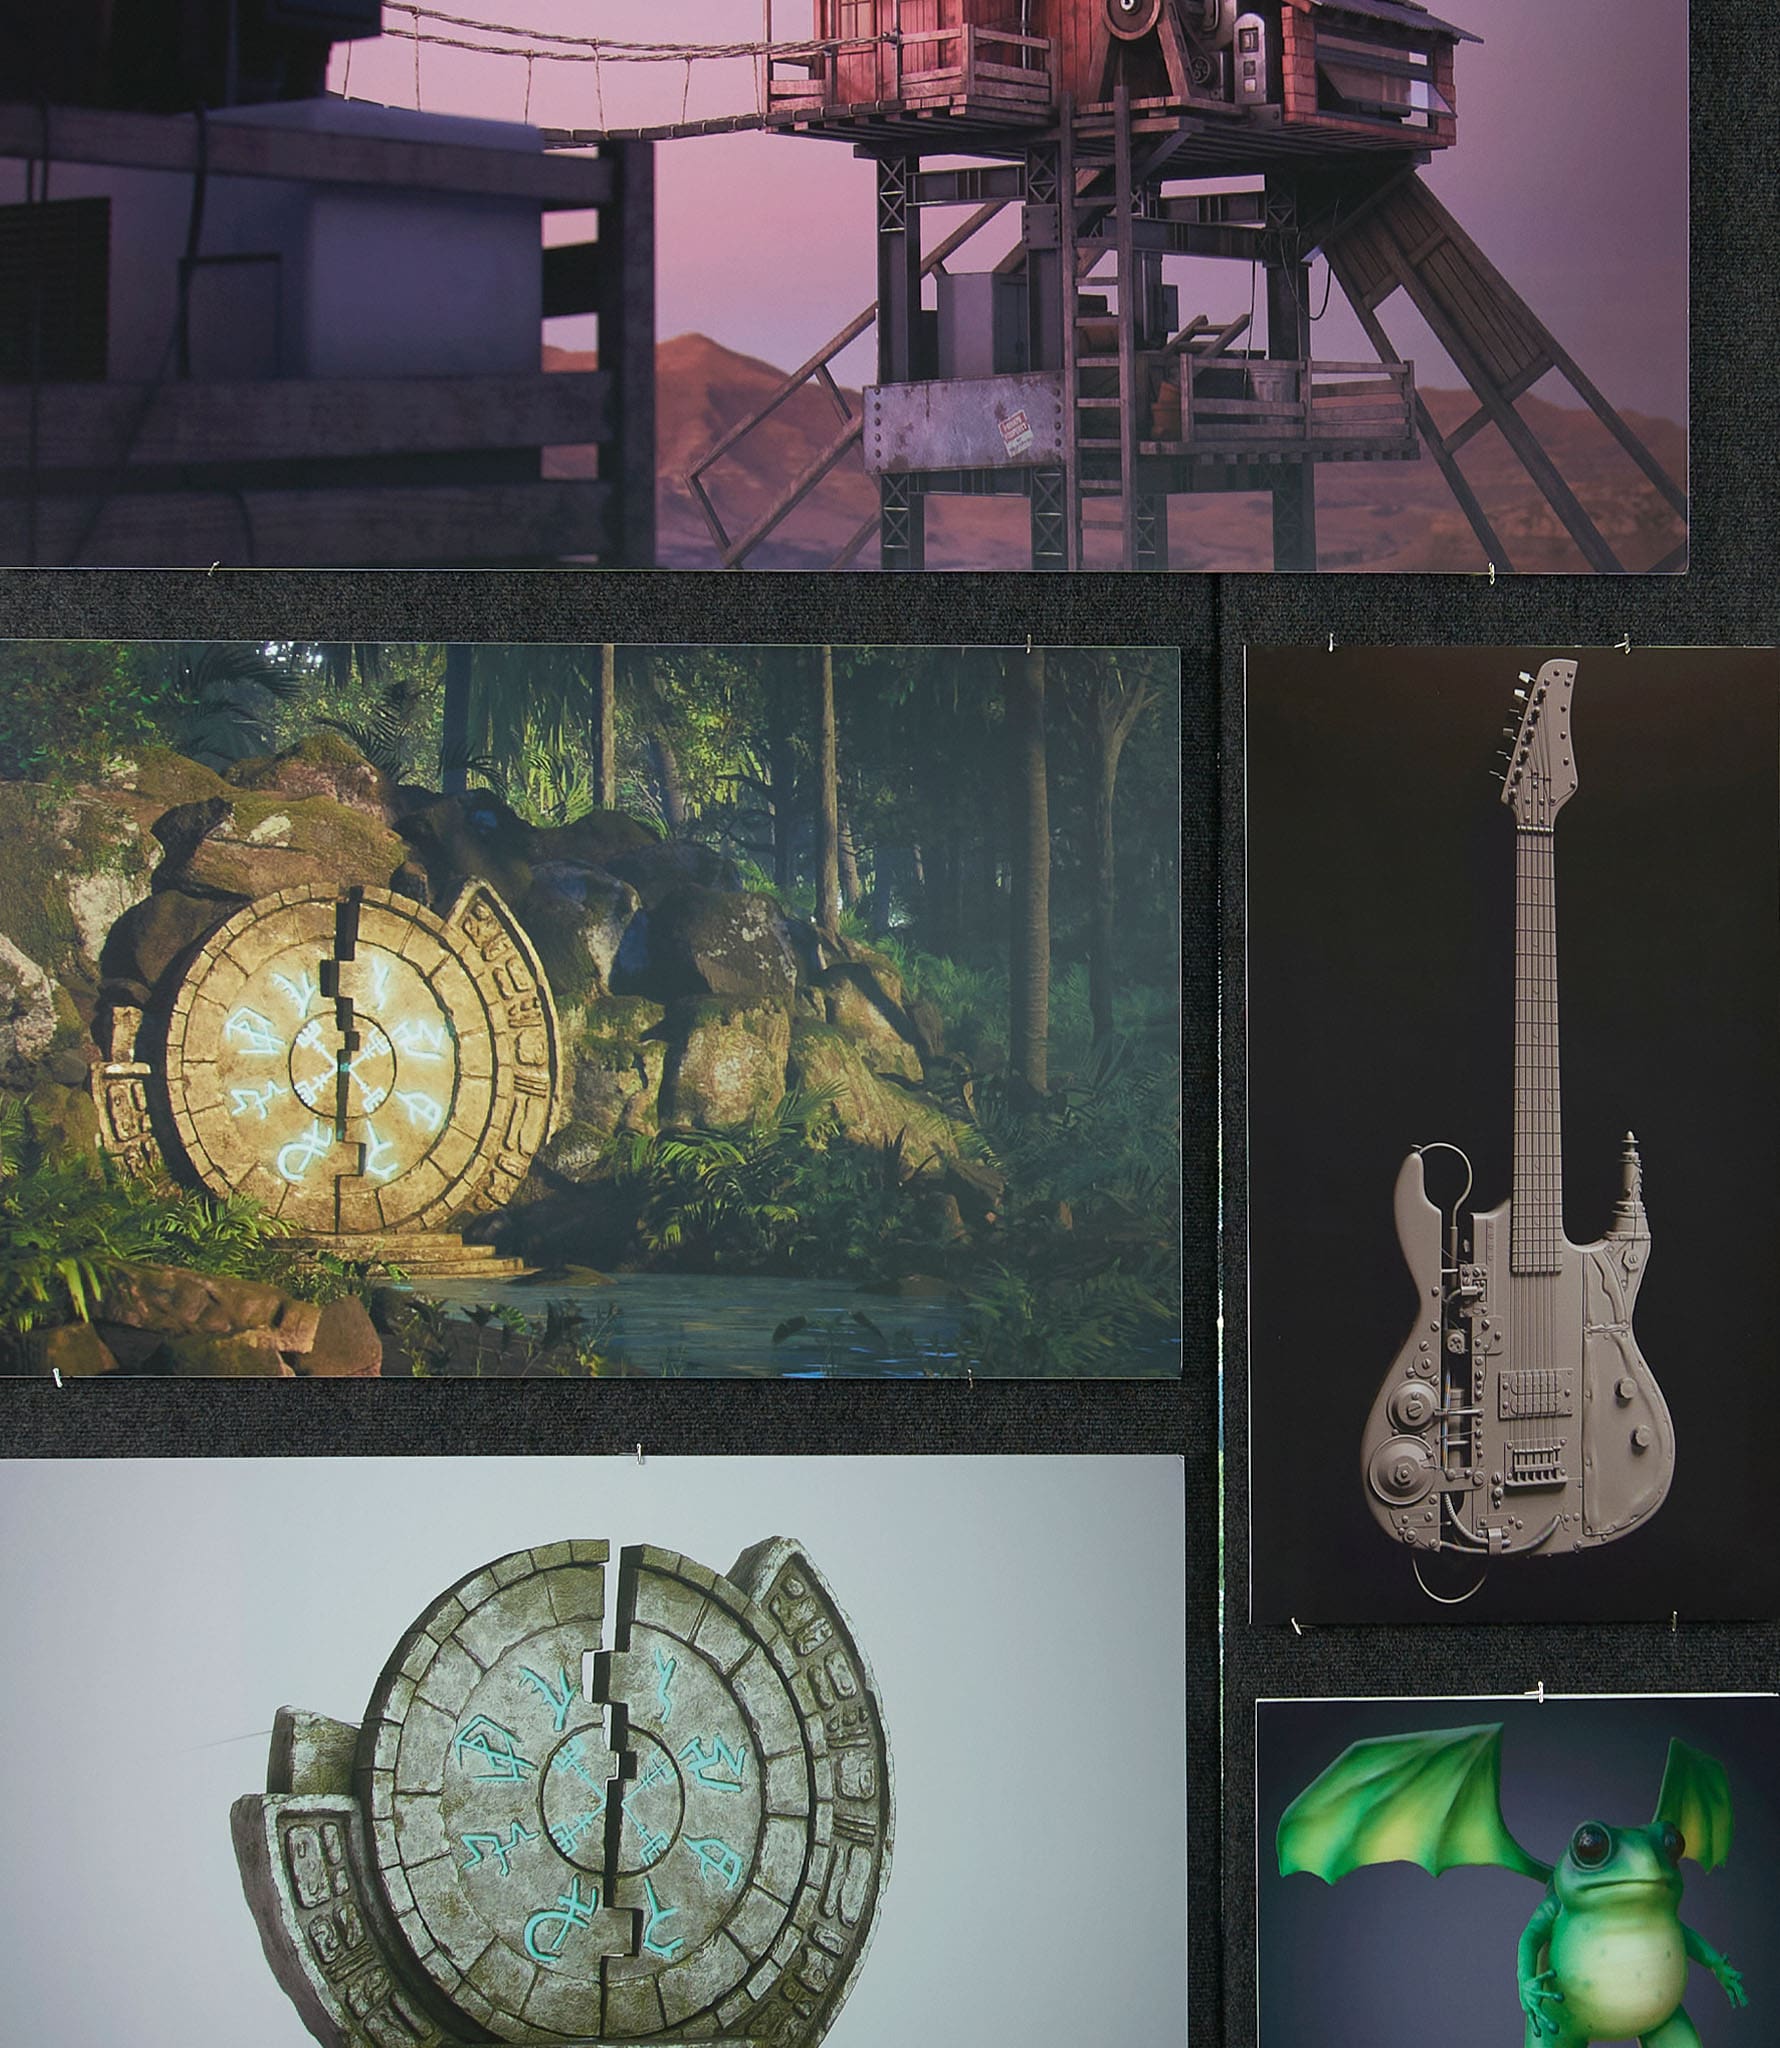 graphic game design showing various views of game elements like a clock and guitar that go in the fictional house